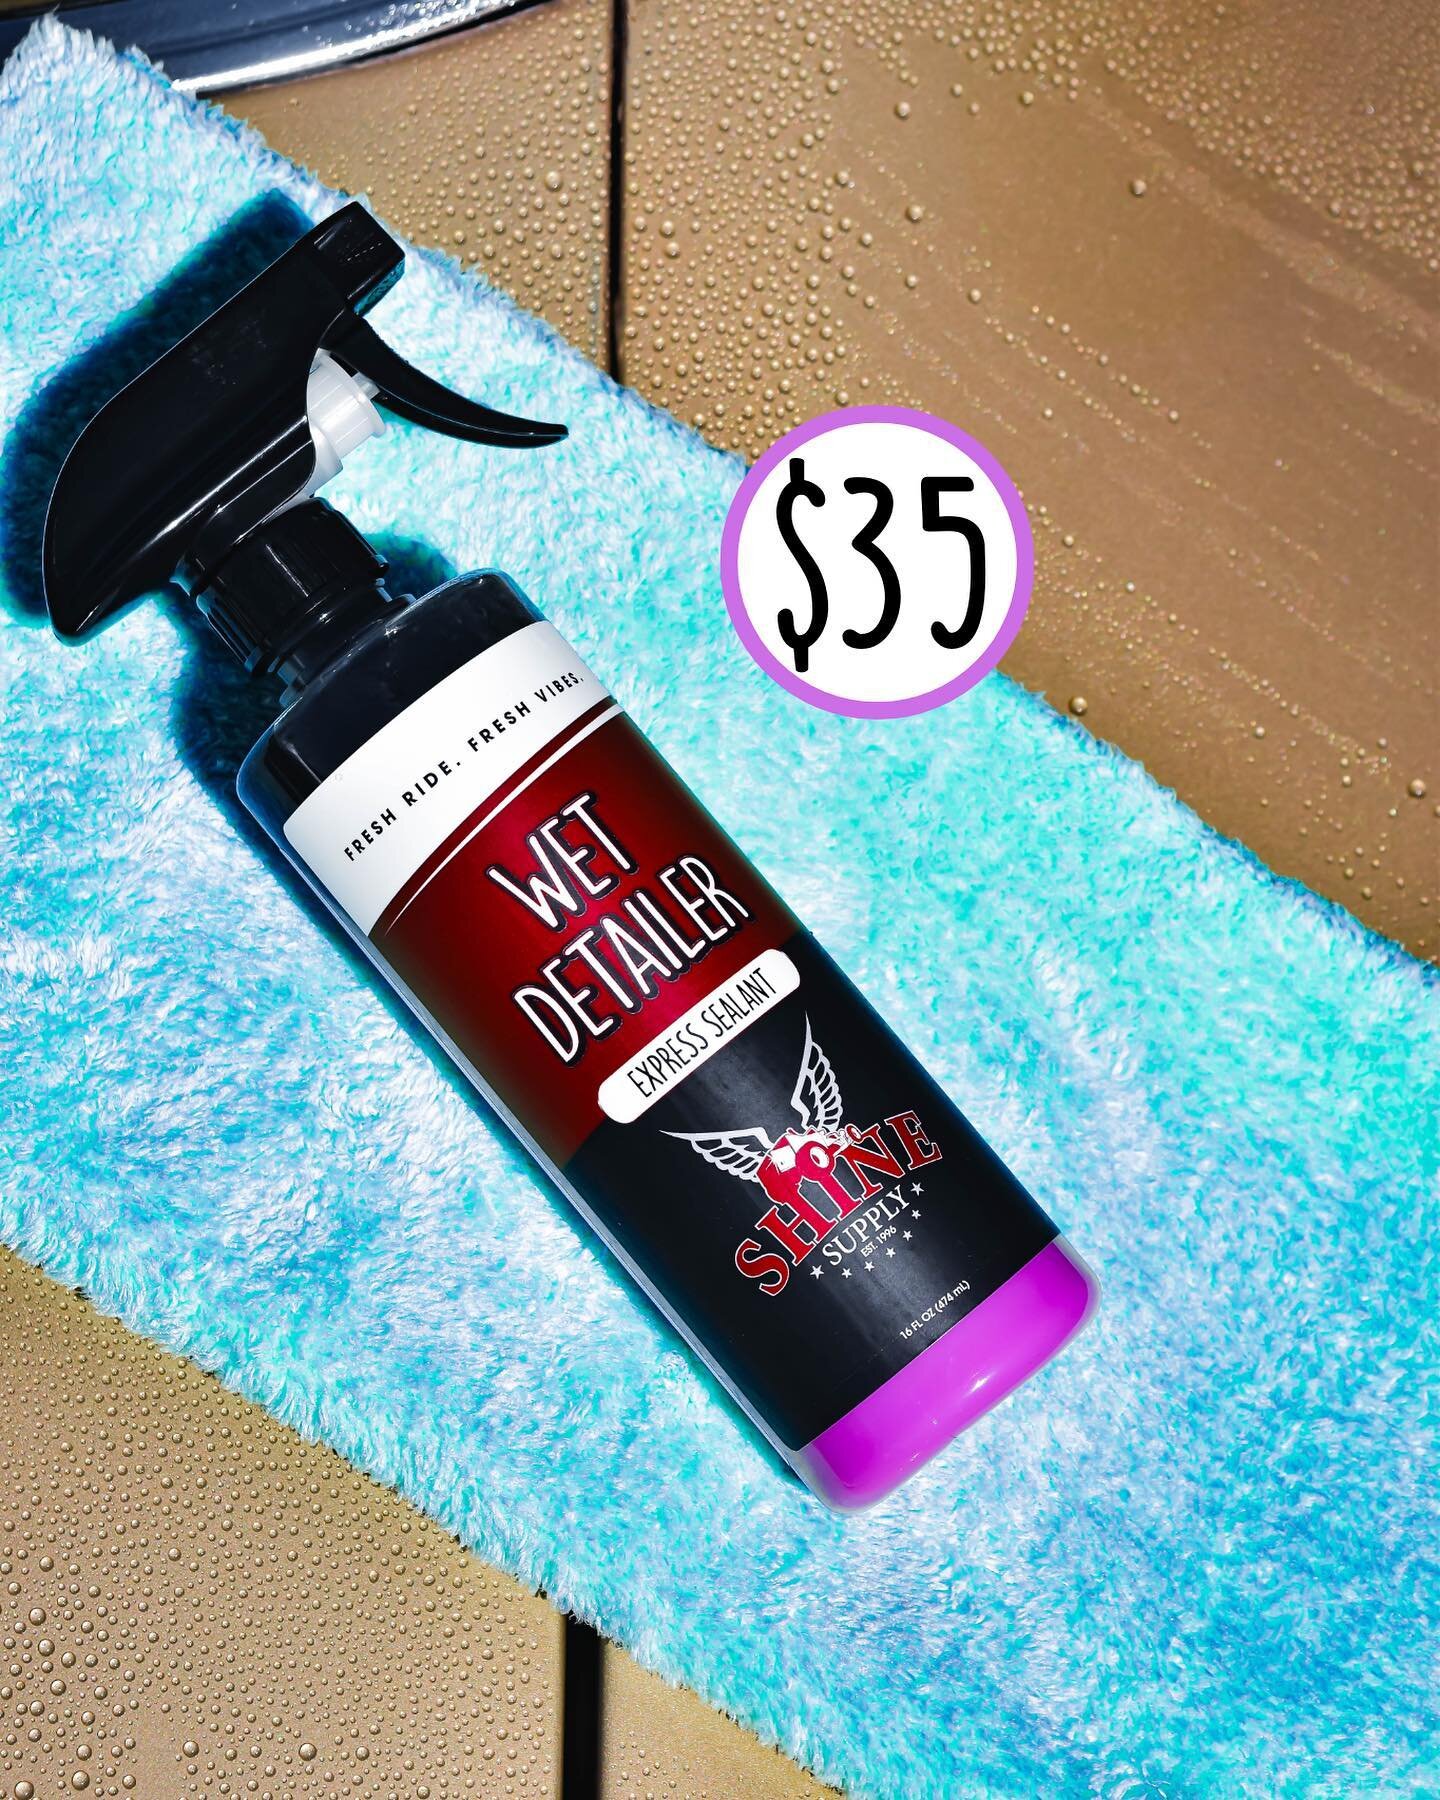 Wet Detailer is a reliable &amp; simple-to-use sealant spray. It will help you dry your vehicle quicker and simultaneously provide durable protection!
&zwnj;
An express sealant is a water-activated paint sealant that quickly boosts your existing laye